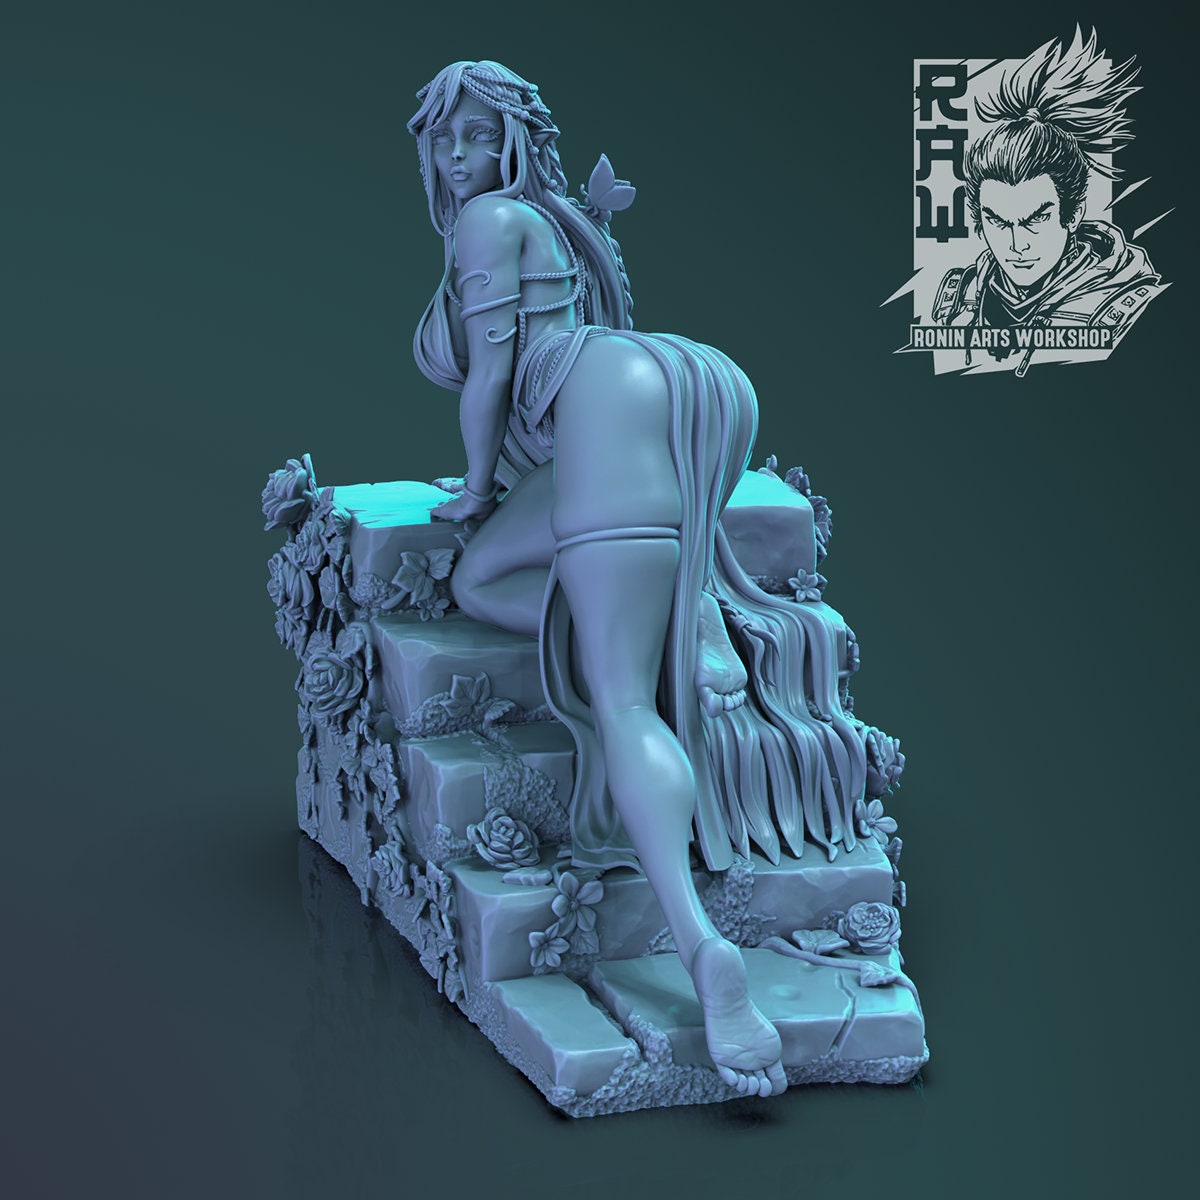 Seductress Twins : Lady Ridia and Chrisi | Clothed or Nude | Resin 3D Printed Pinup | Ronin Arts Workshop